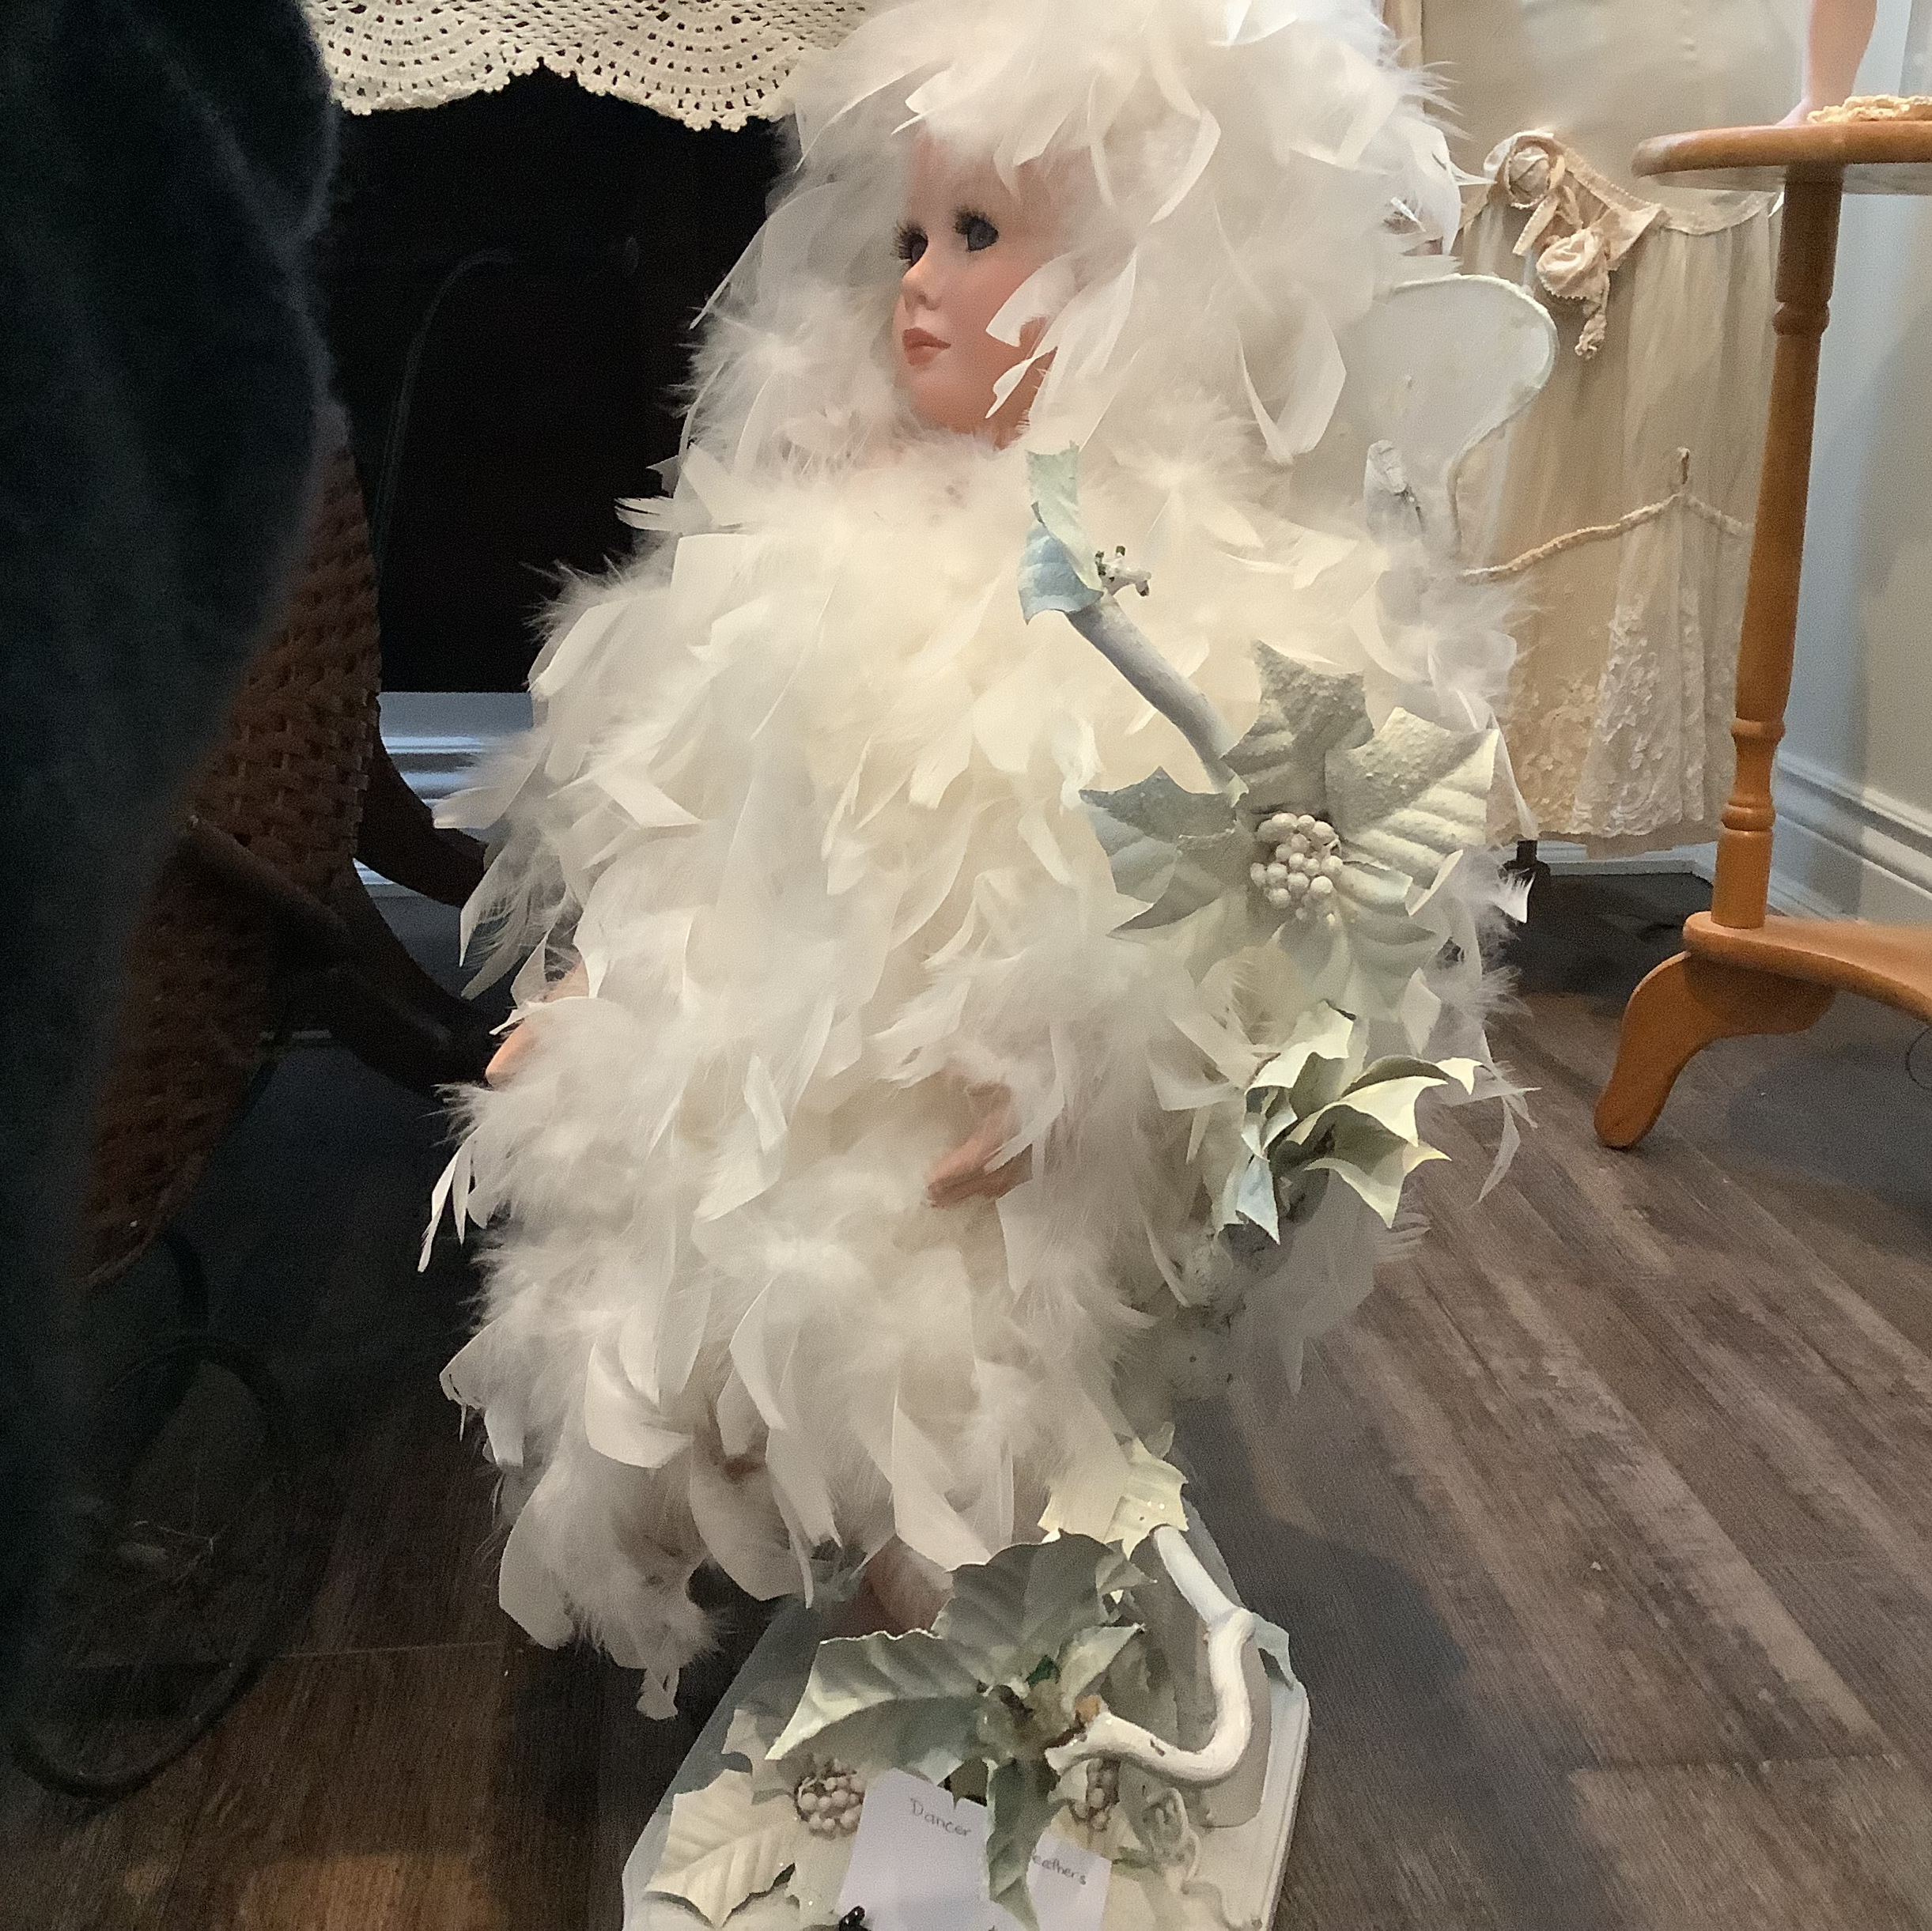 Dancer doll in costume and wig made from white feathers